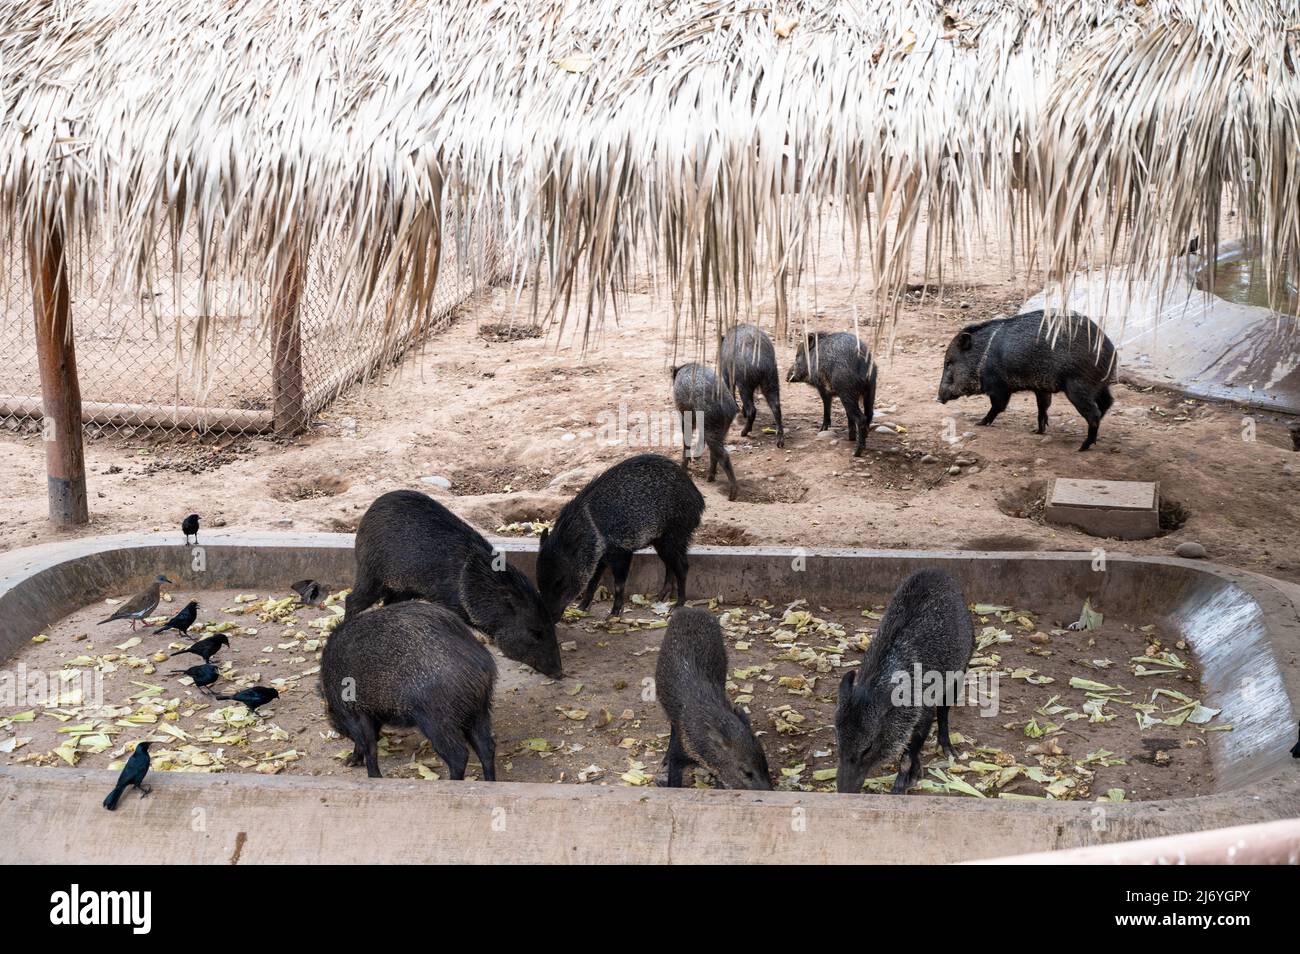 Collared peccary eating in an animal enclosure in Peru Stock Photo